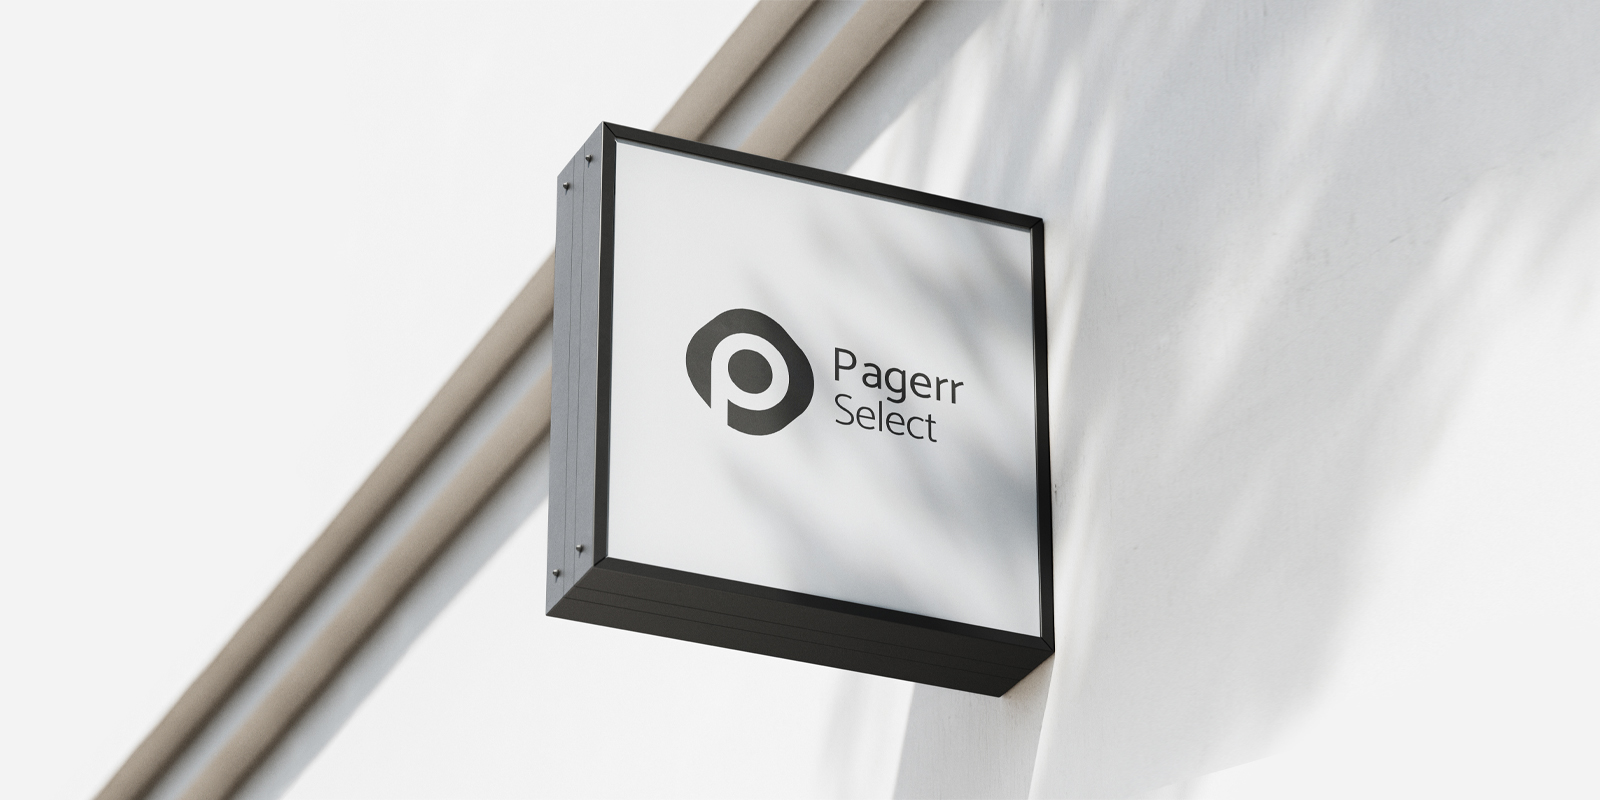 Essential signs in Newcastle - Print with Pagerr